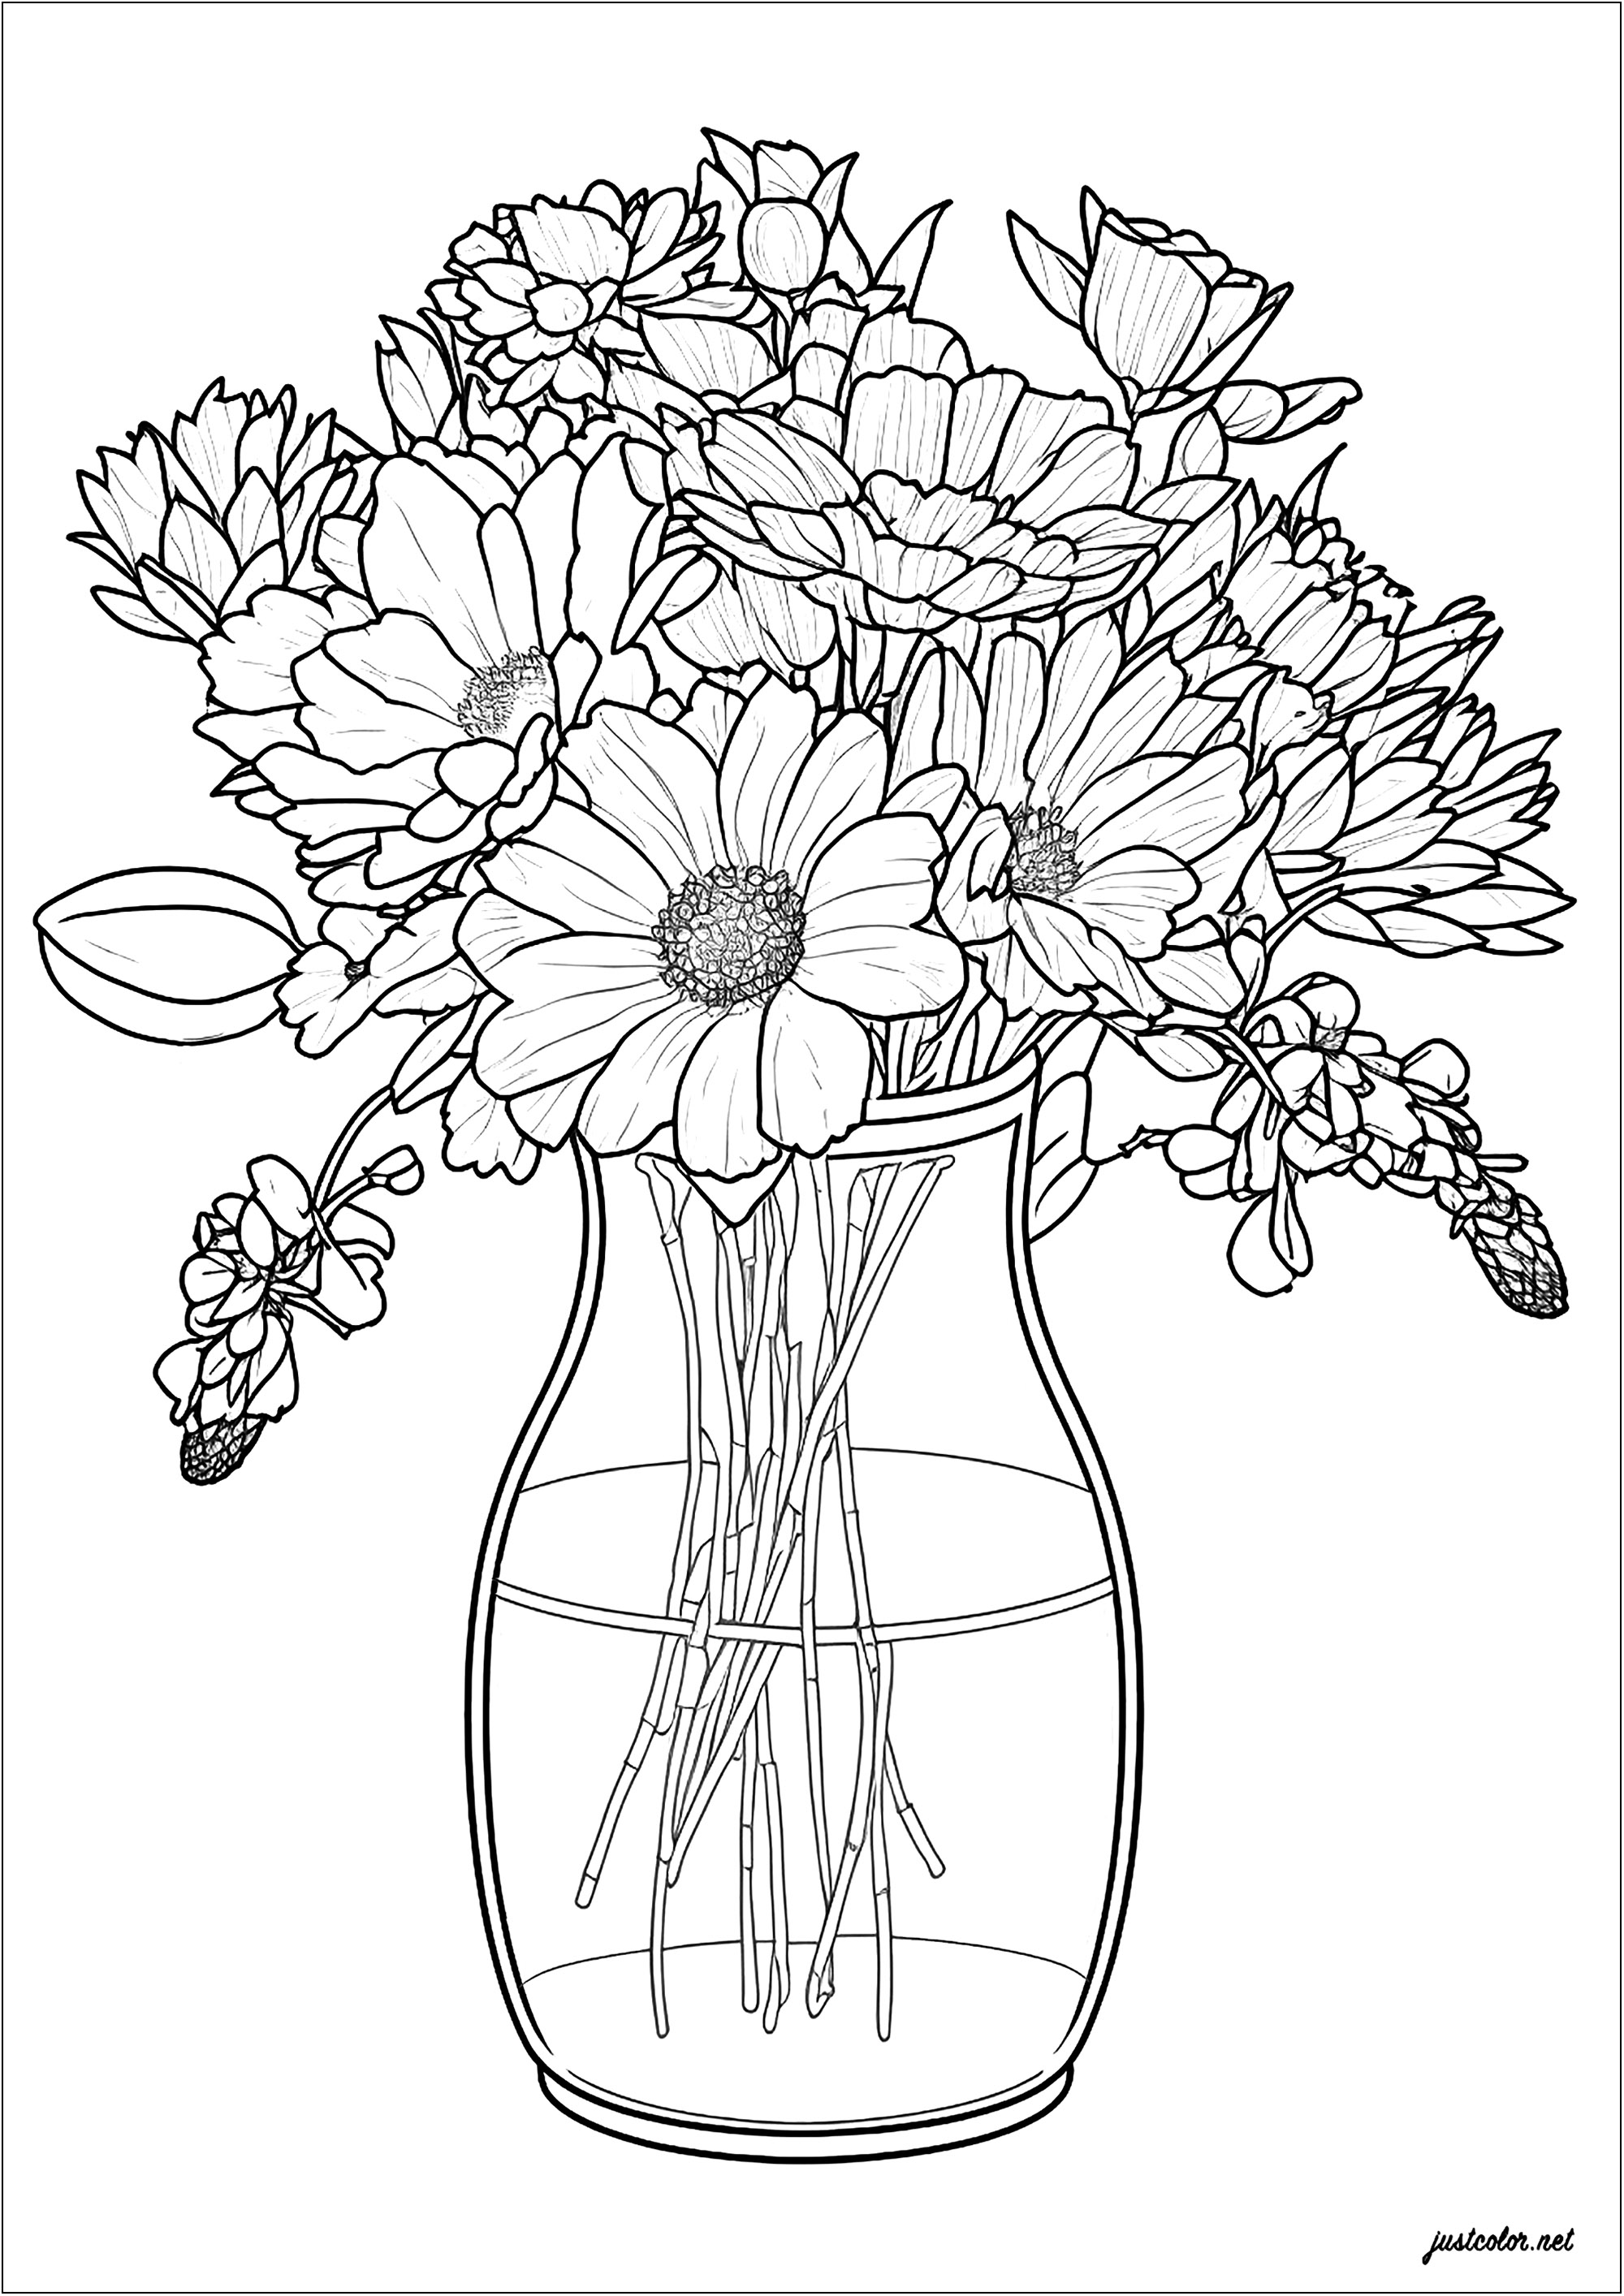 How to draw a Flower Vase 🌻🌼🌷 Flowers Pot 😍🌻😍 Easy Drawing technique  | #howtodraw #flowers #fuldani #flowervase #flowerpot #pencil #drawing # sketch #art #shedding #technique #creativeart | By Rongdhonu Art and  DrawingFacebook